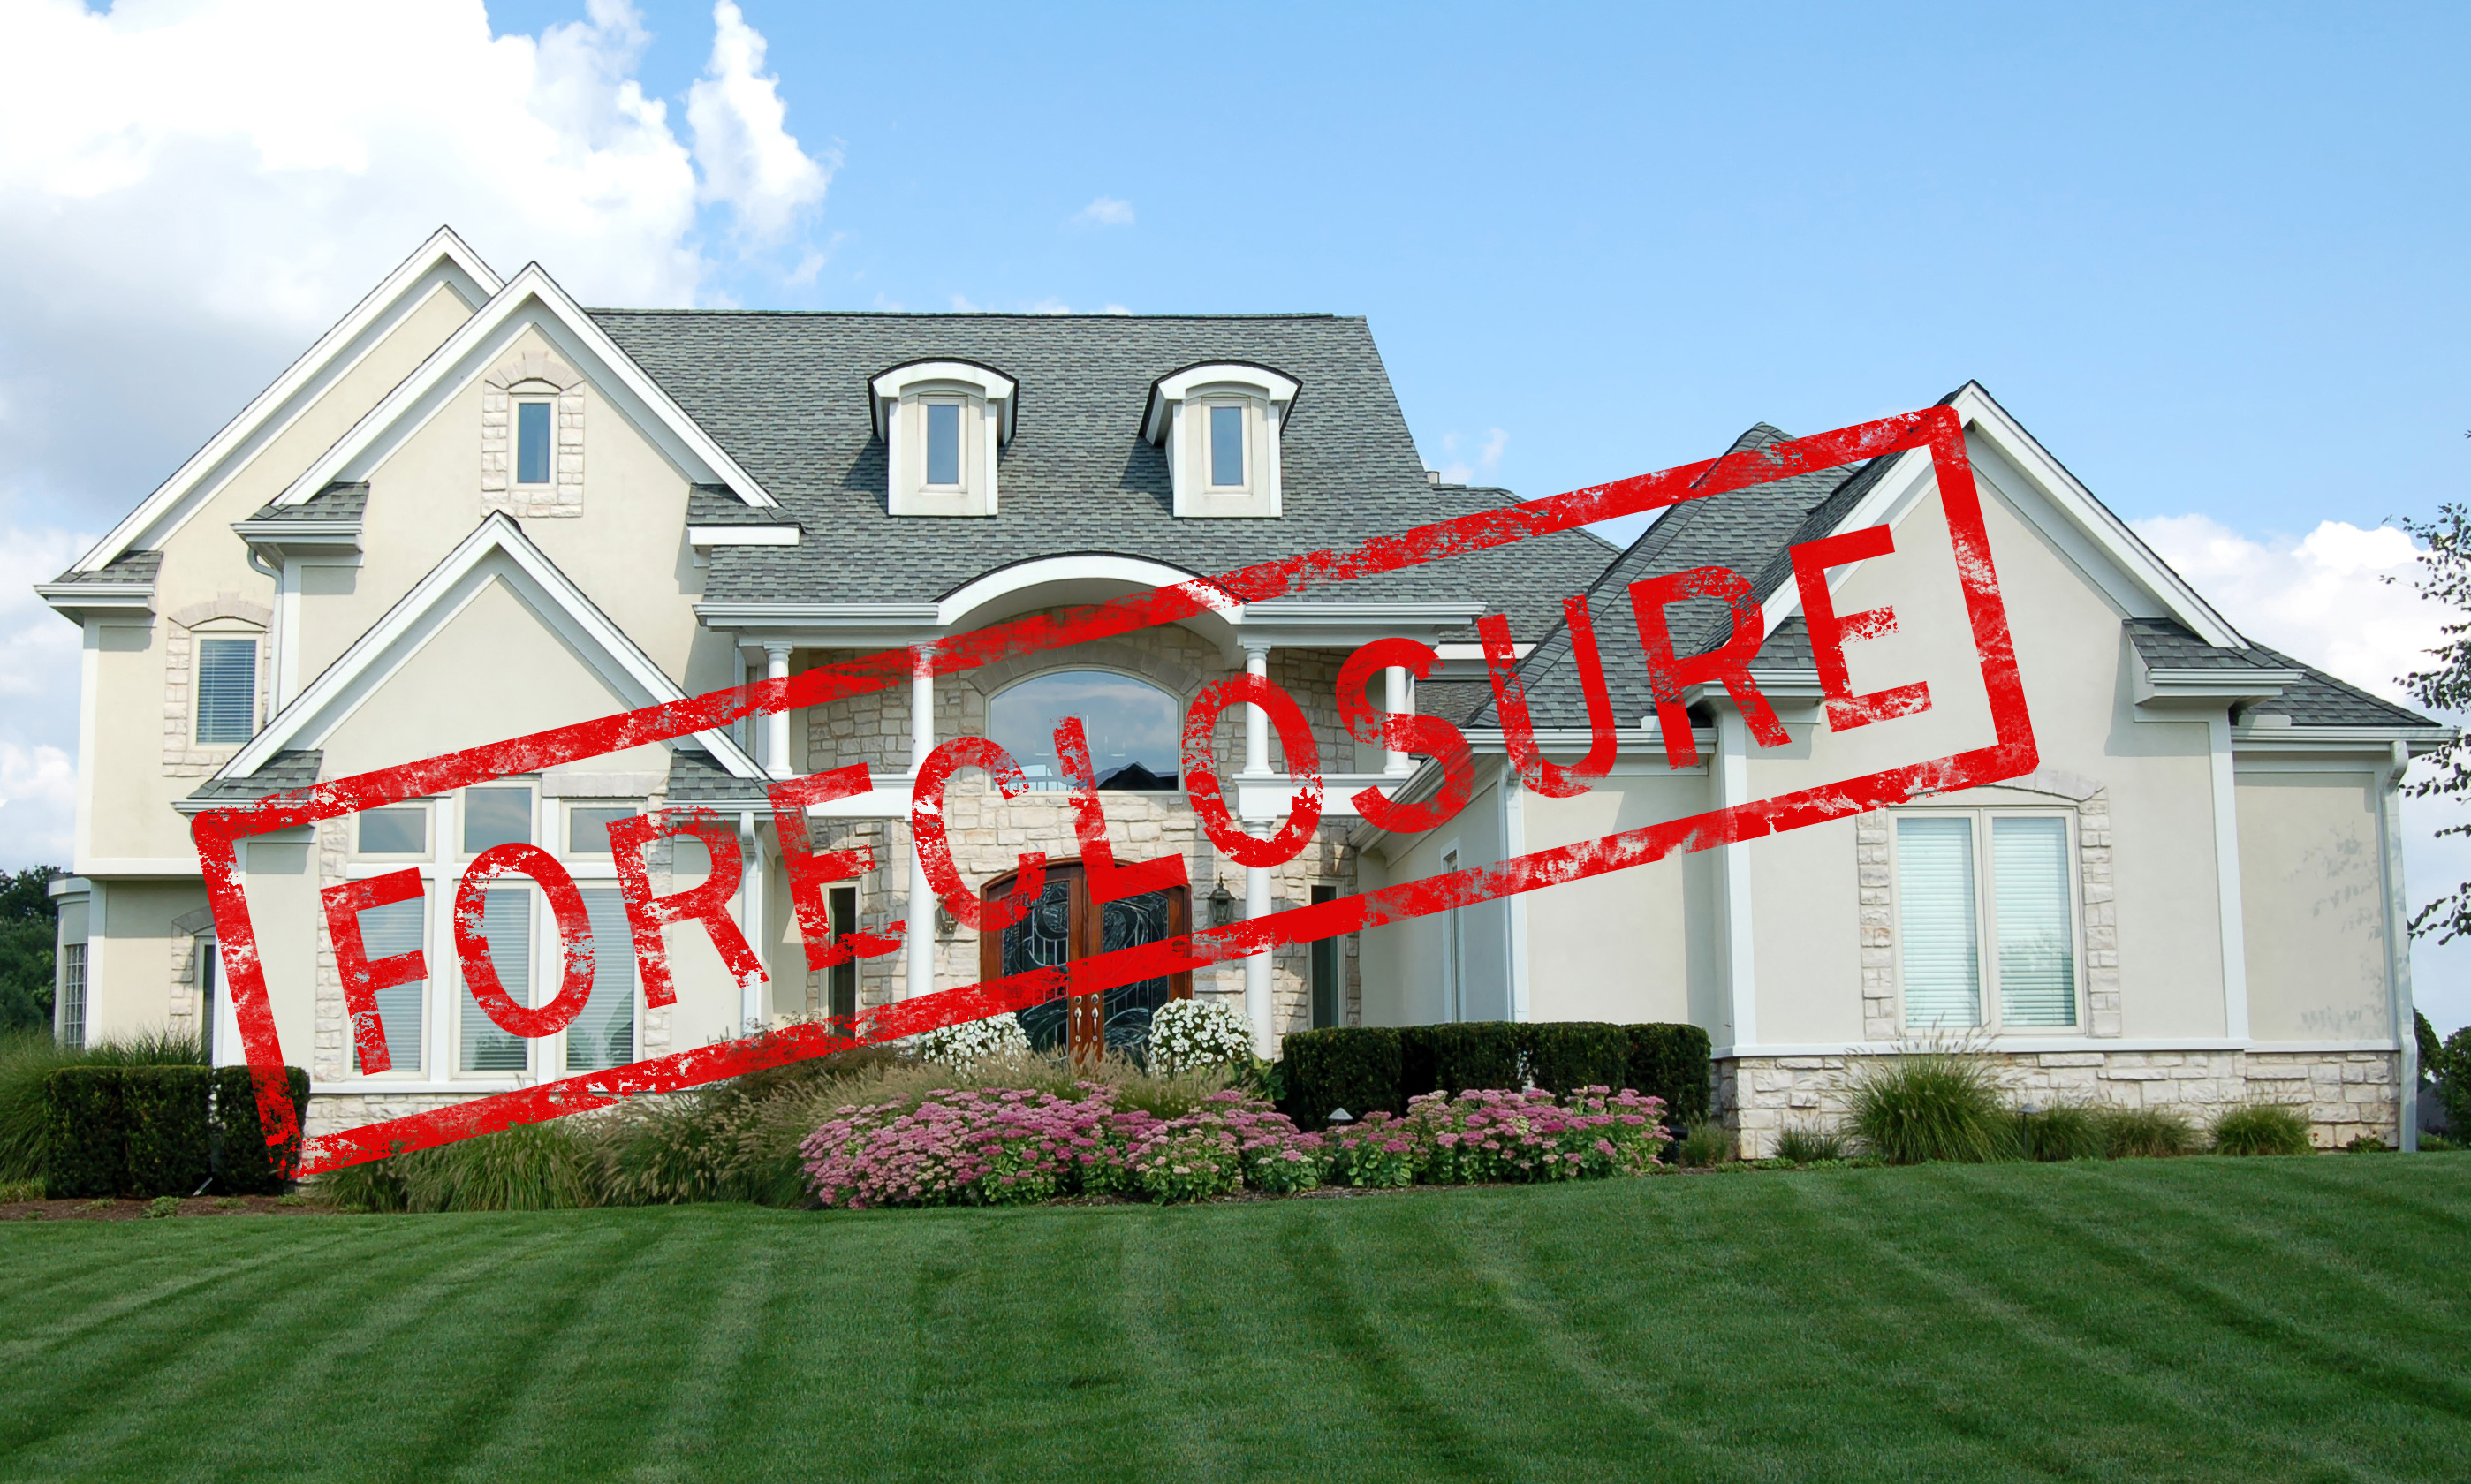 Call Anderson Appraisal, LLC when you need valuations for Potter foreclosures